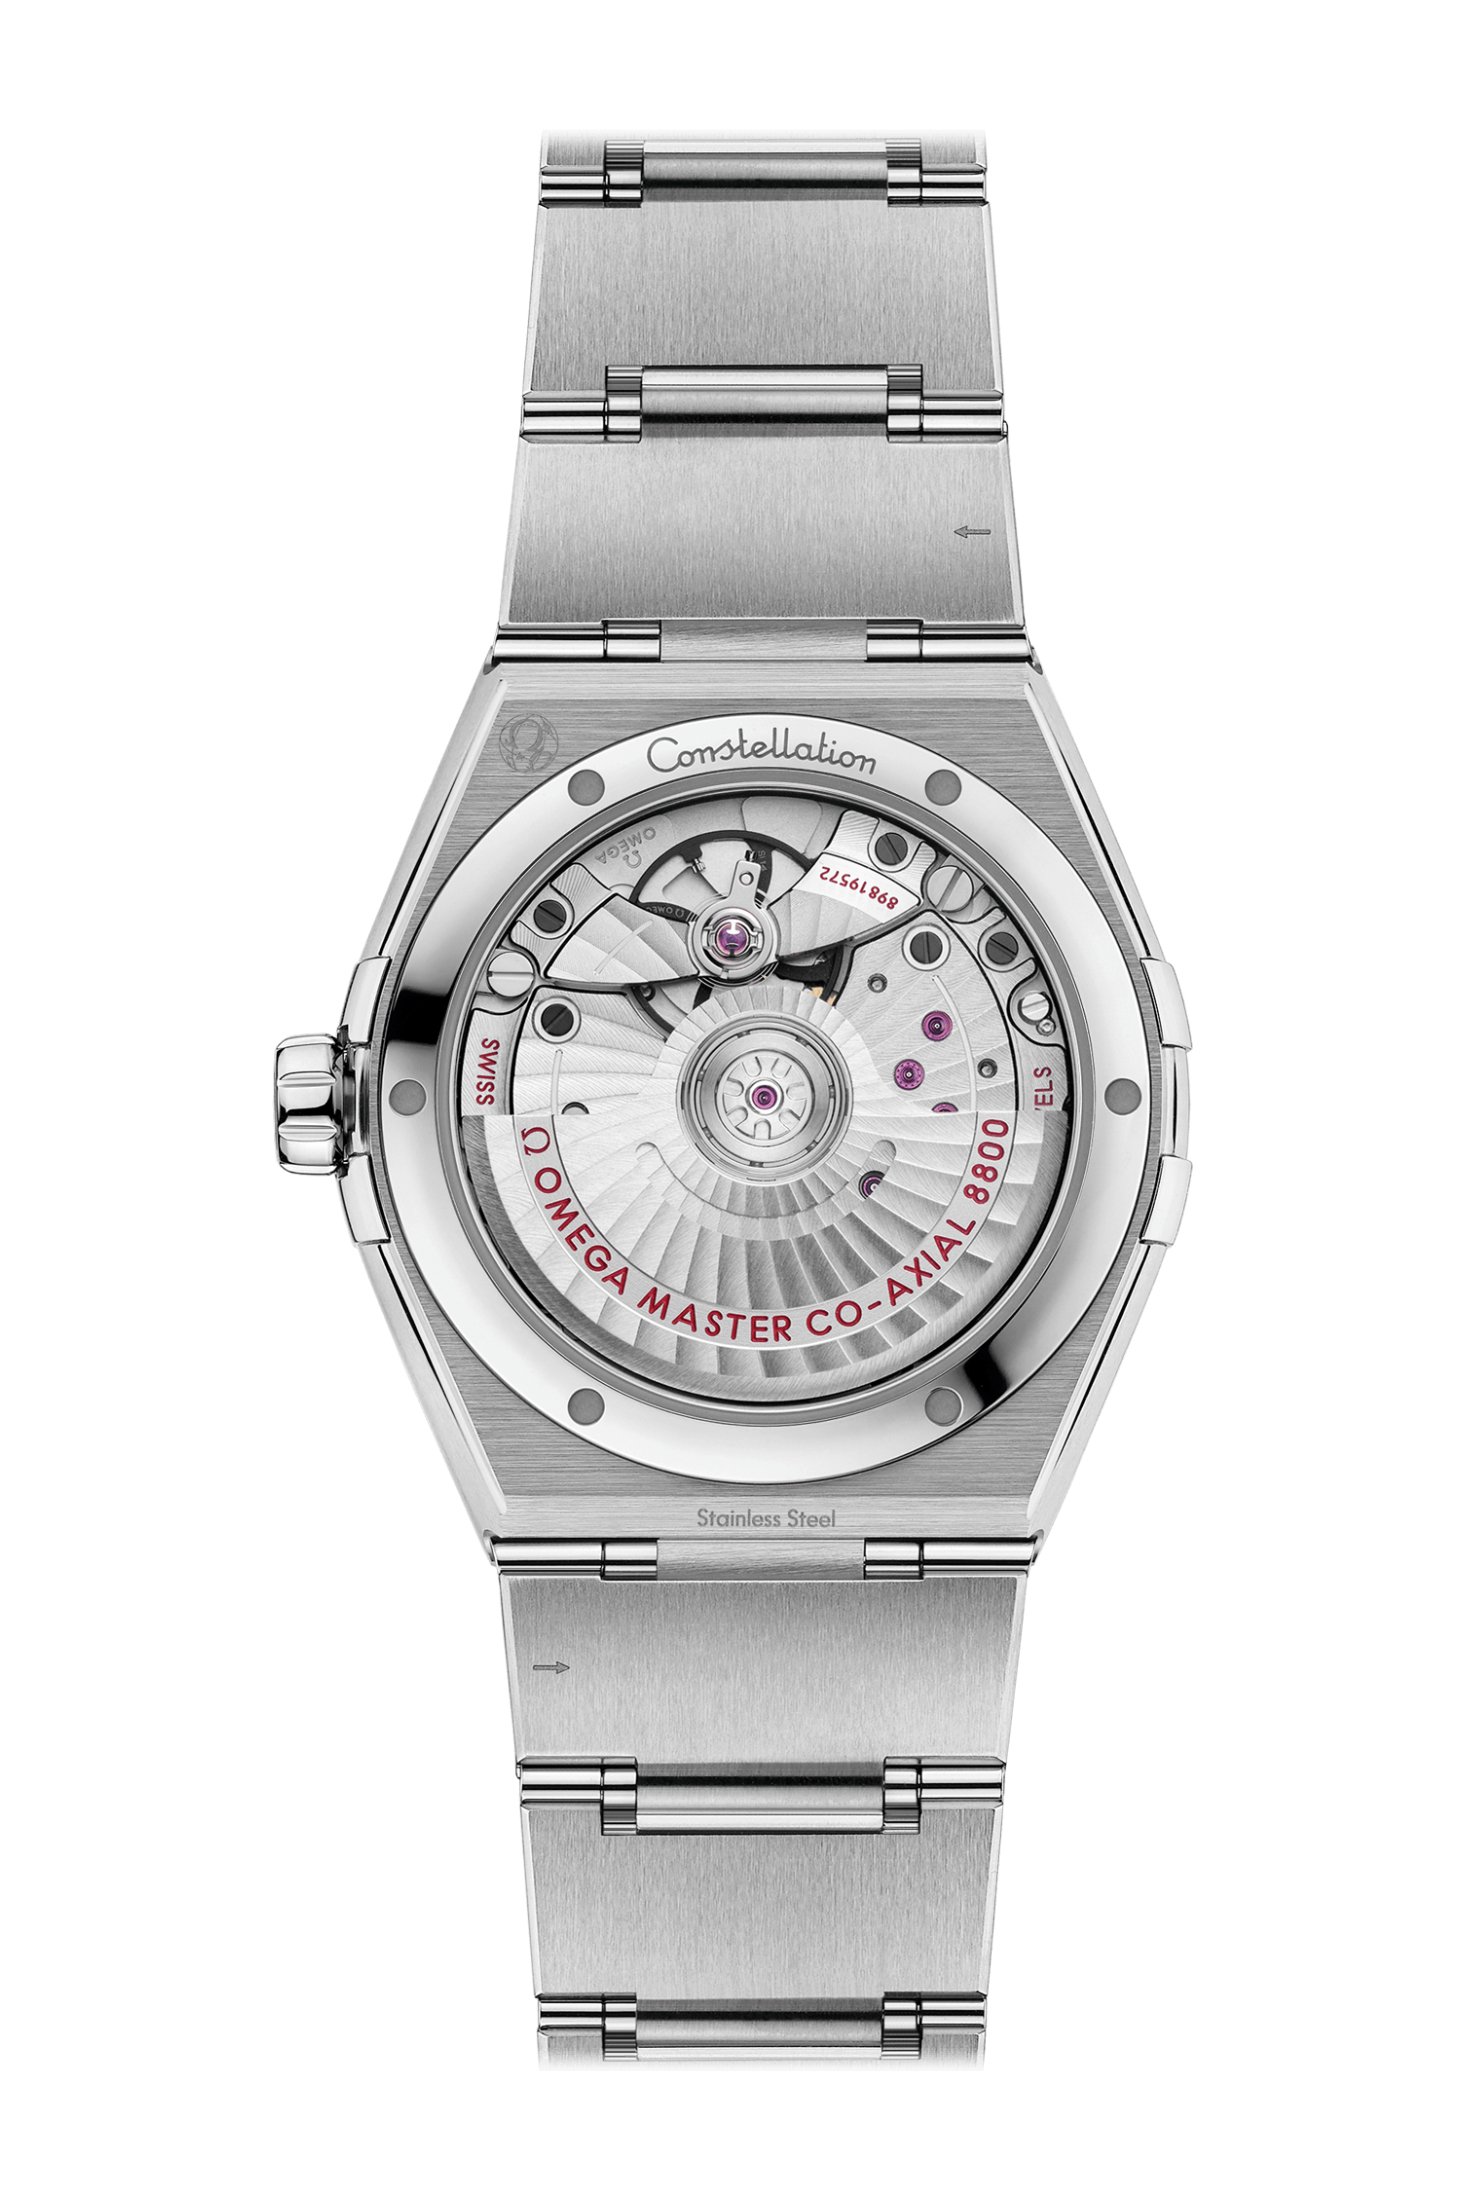 Ladies' watch  OMEGA, Constellation Co Axial Master Chronometer / 36mm, SKU: 131.10.36.20.06.001 | watchapproach.com